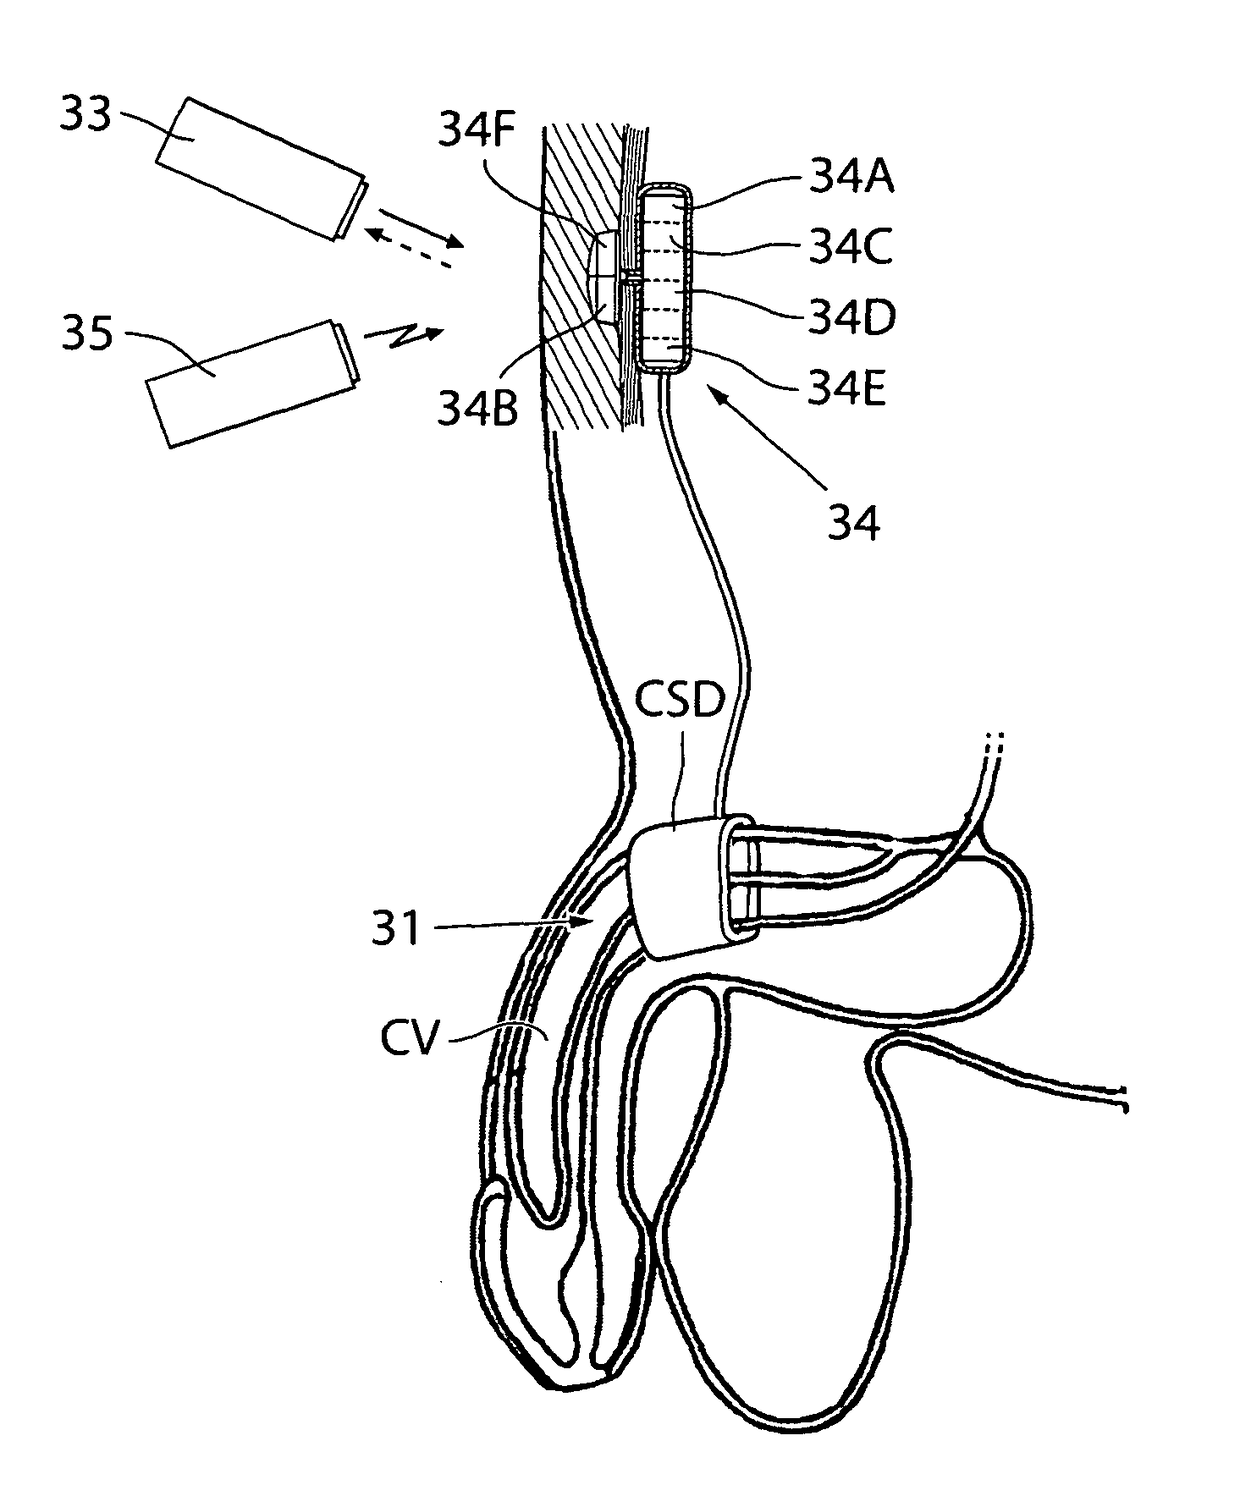 Method for controlling flow in a bodily organ